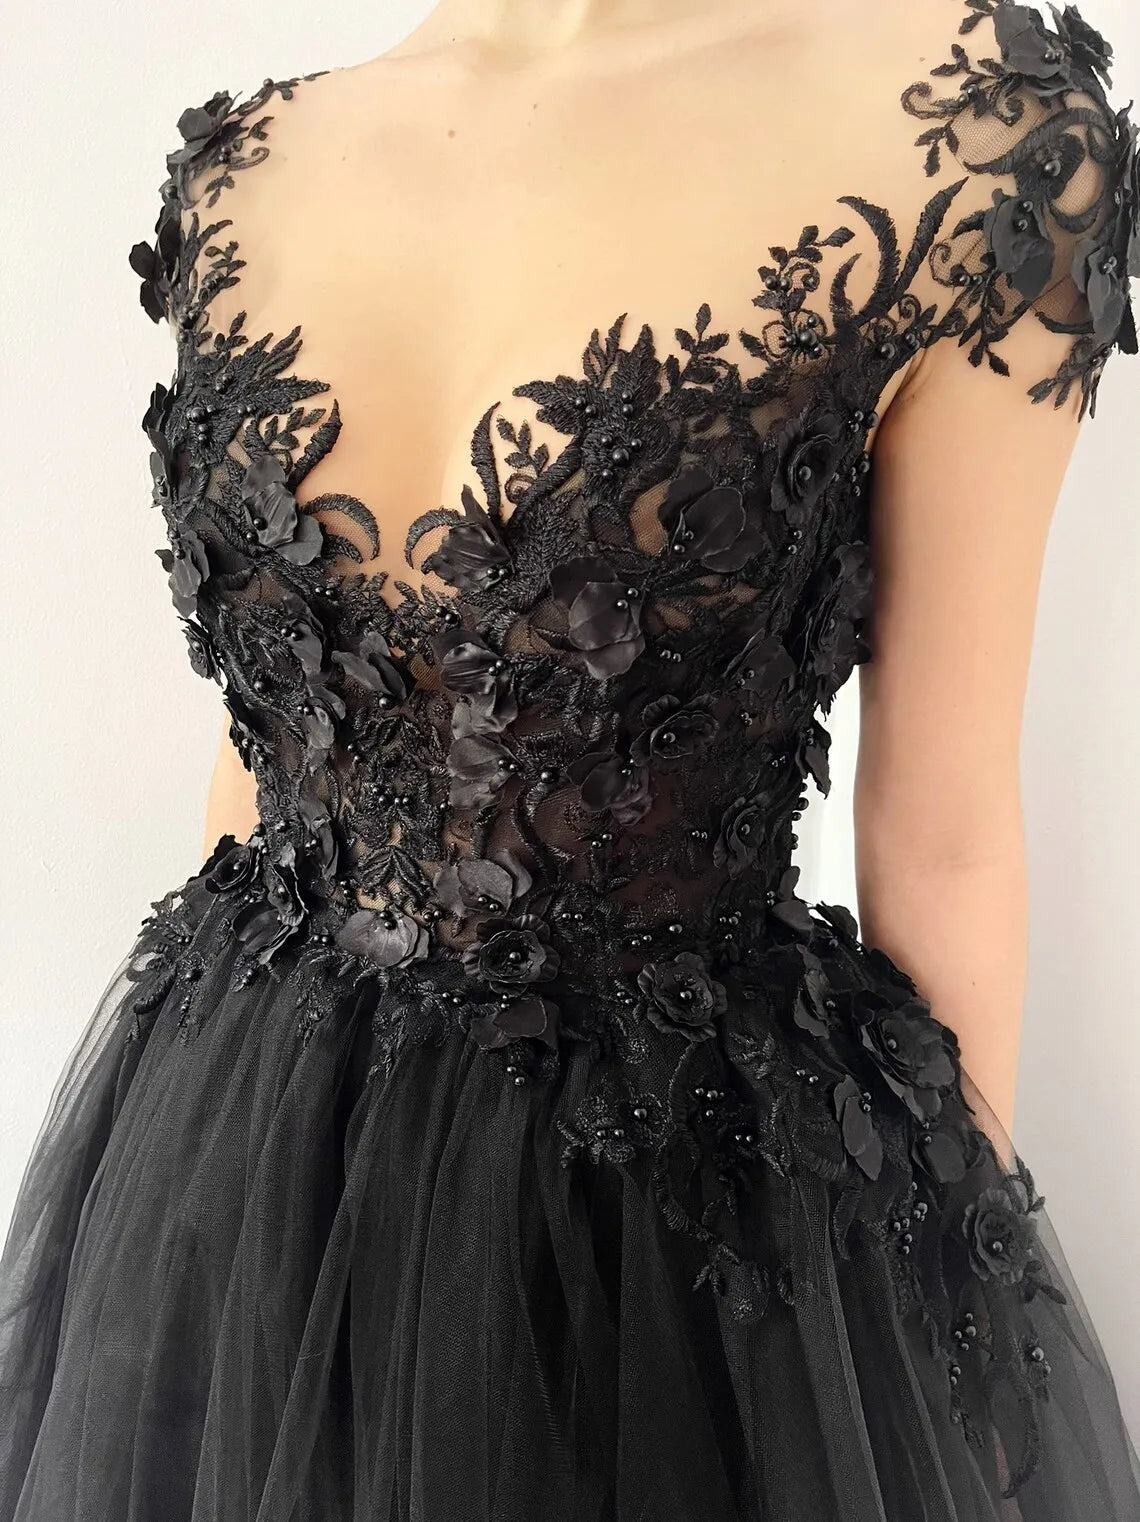 Beaded Evening Dress Black Sheer Neck Ball Gown Tulle Lace Applique Floral Formal Party Prom Gowns Women Long Floor Length